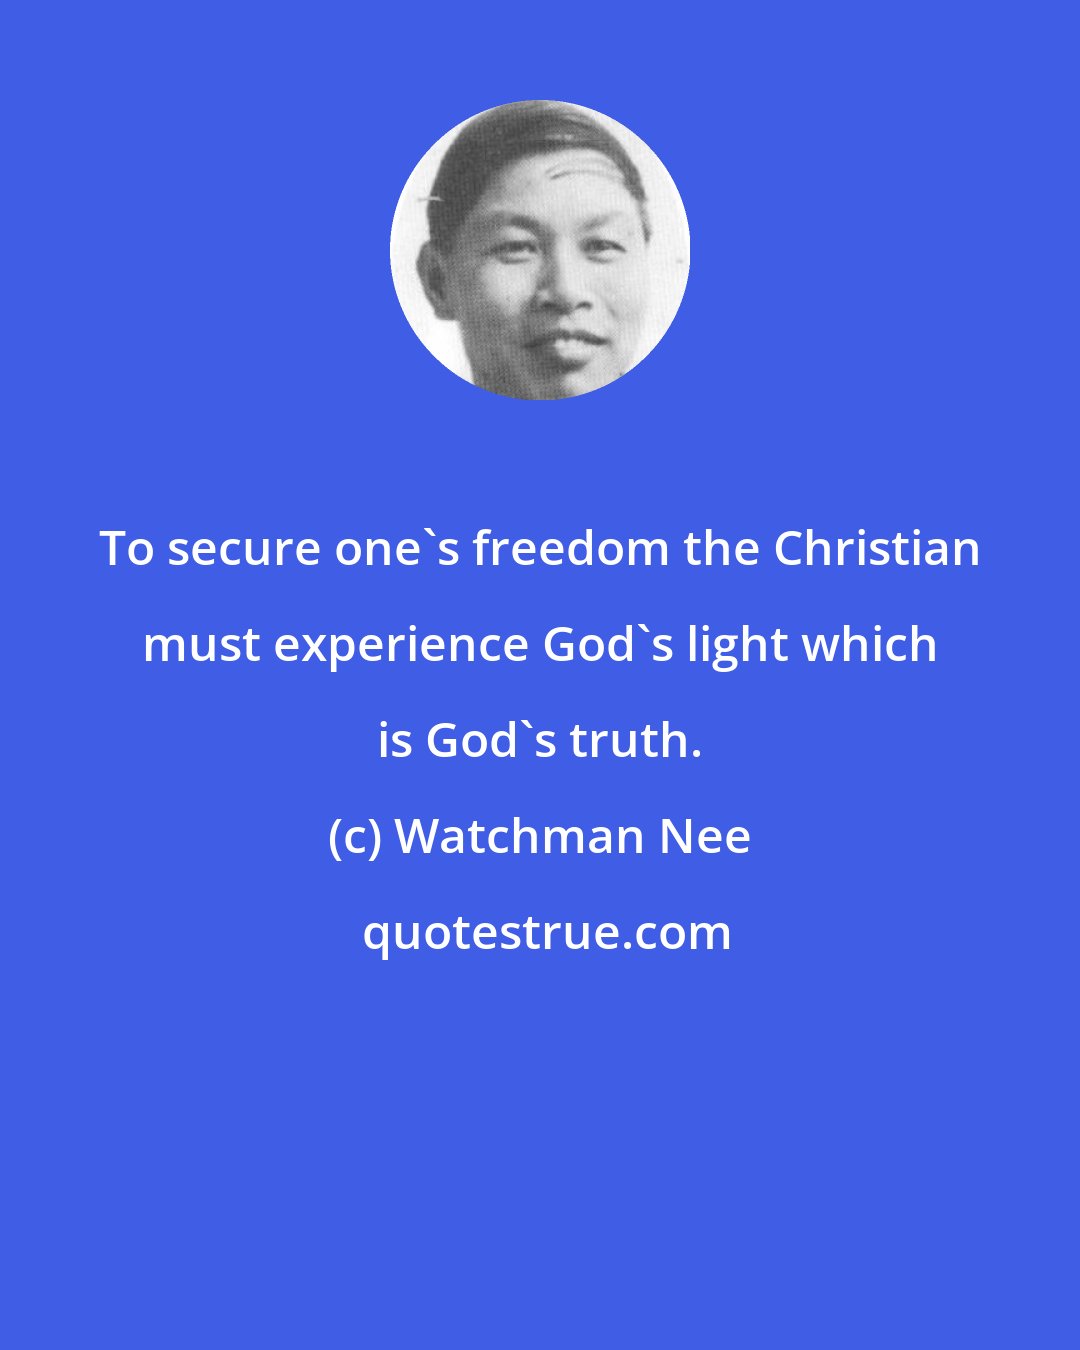 Watchman Nee: To secure one's freedom the Christian must experience God's light which is God's truth.